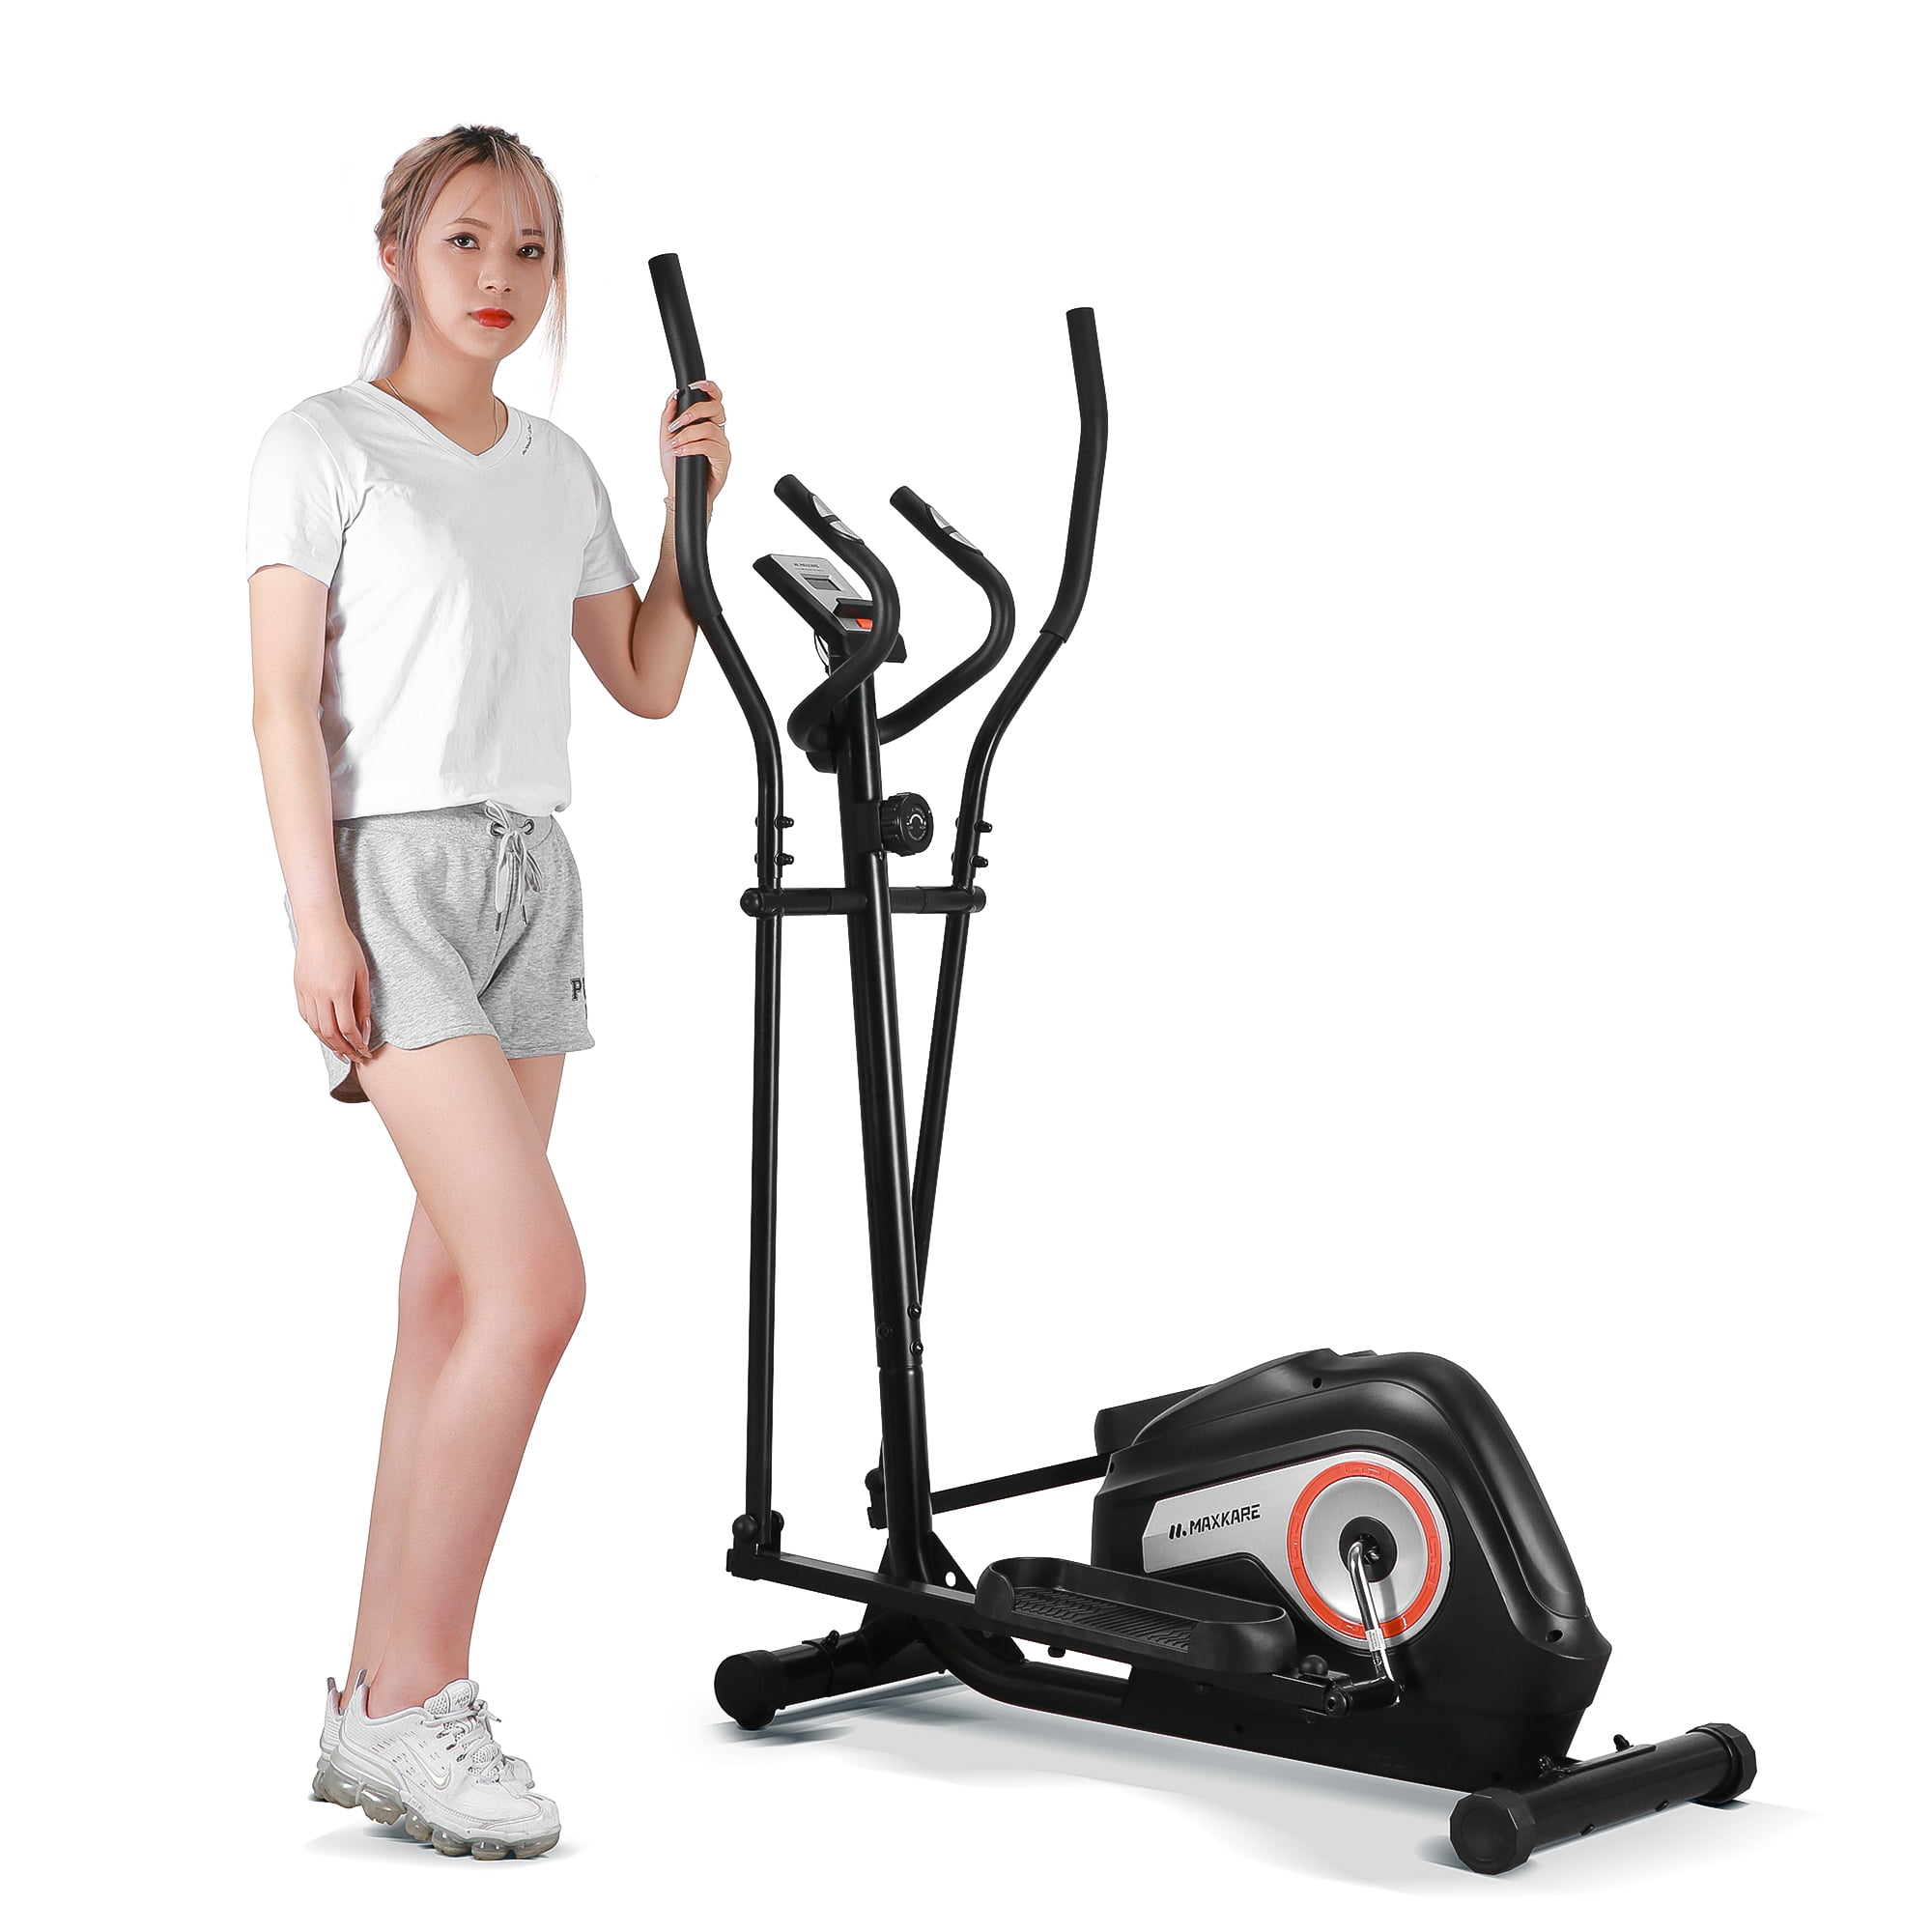 Details about   Elliptical Exercise Machine Fitness Trainer Cardio Home Gym Workout Equipment 